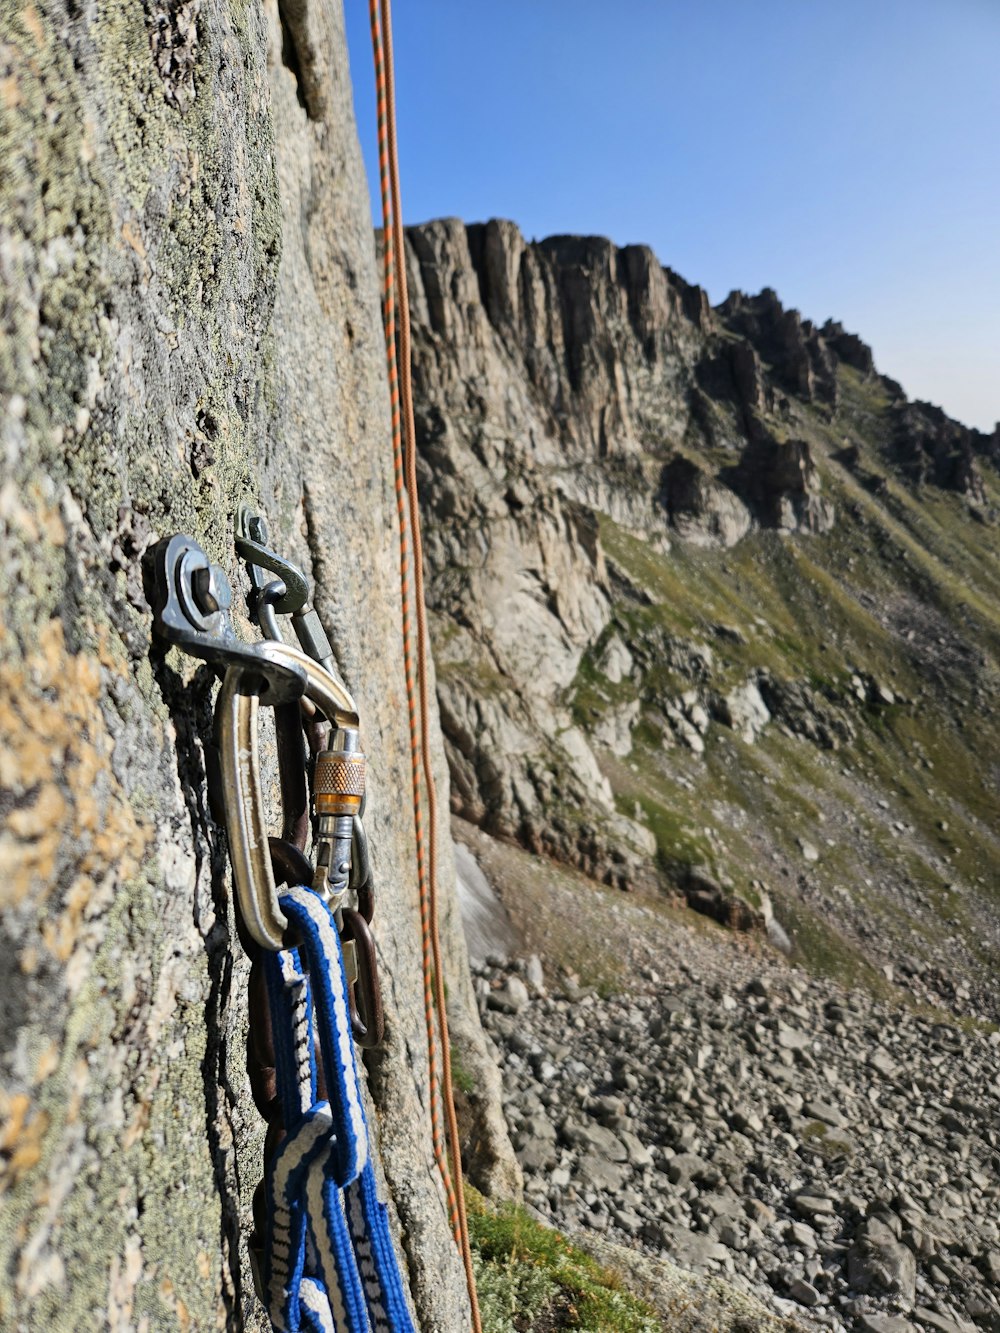 a rock climber's gear hanging on the side of a mountain